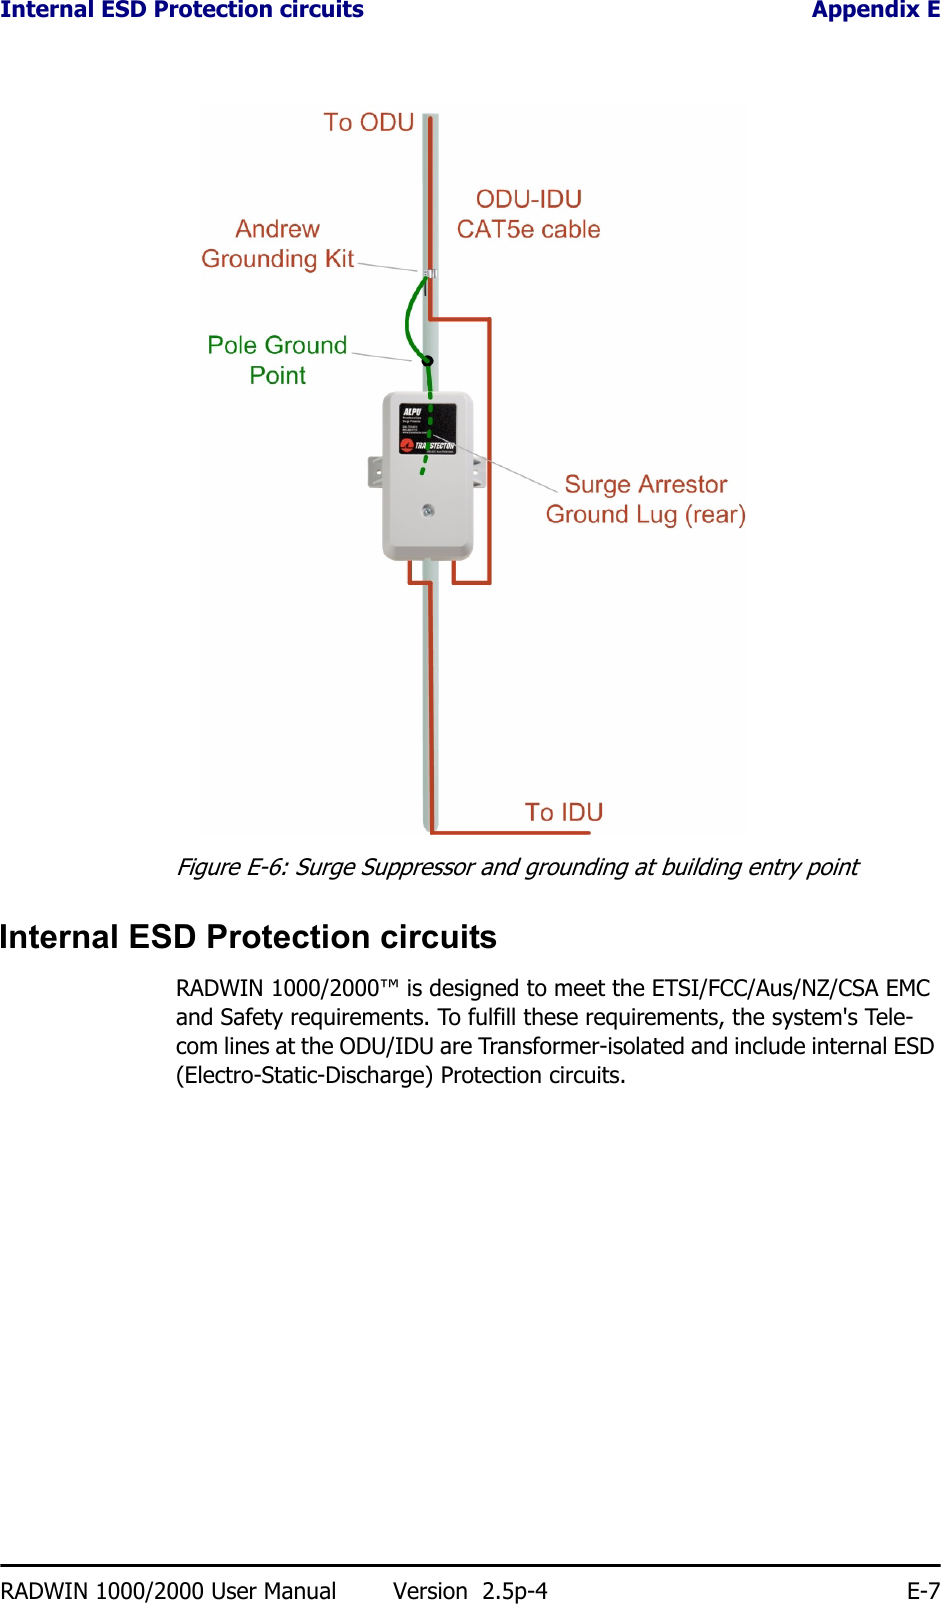 Internal ESD Protection circuits Appendix ERADWIN 1000/2000 User Manual Version  2.5p-4 E-7Figure E-6: Surge Suppressor and grounding at building entry pointInternal ESD Protection circuitsRADWIN 1000/2000™ is designed to meet the ETSI/FCC/Aus/NZ/CSA EMC and Safety requirements. To fulfill these requirements, the system&apos;s Tele-com lines at the ODU/IDU are Transformer-isolated and include internal ESD (Electro-Static-Discharge) Protection circuits.